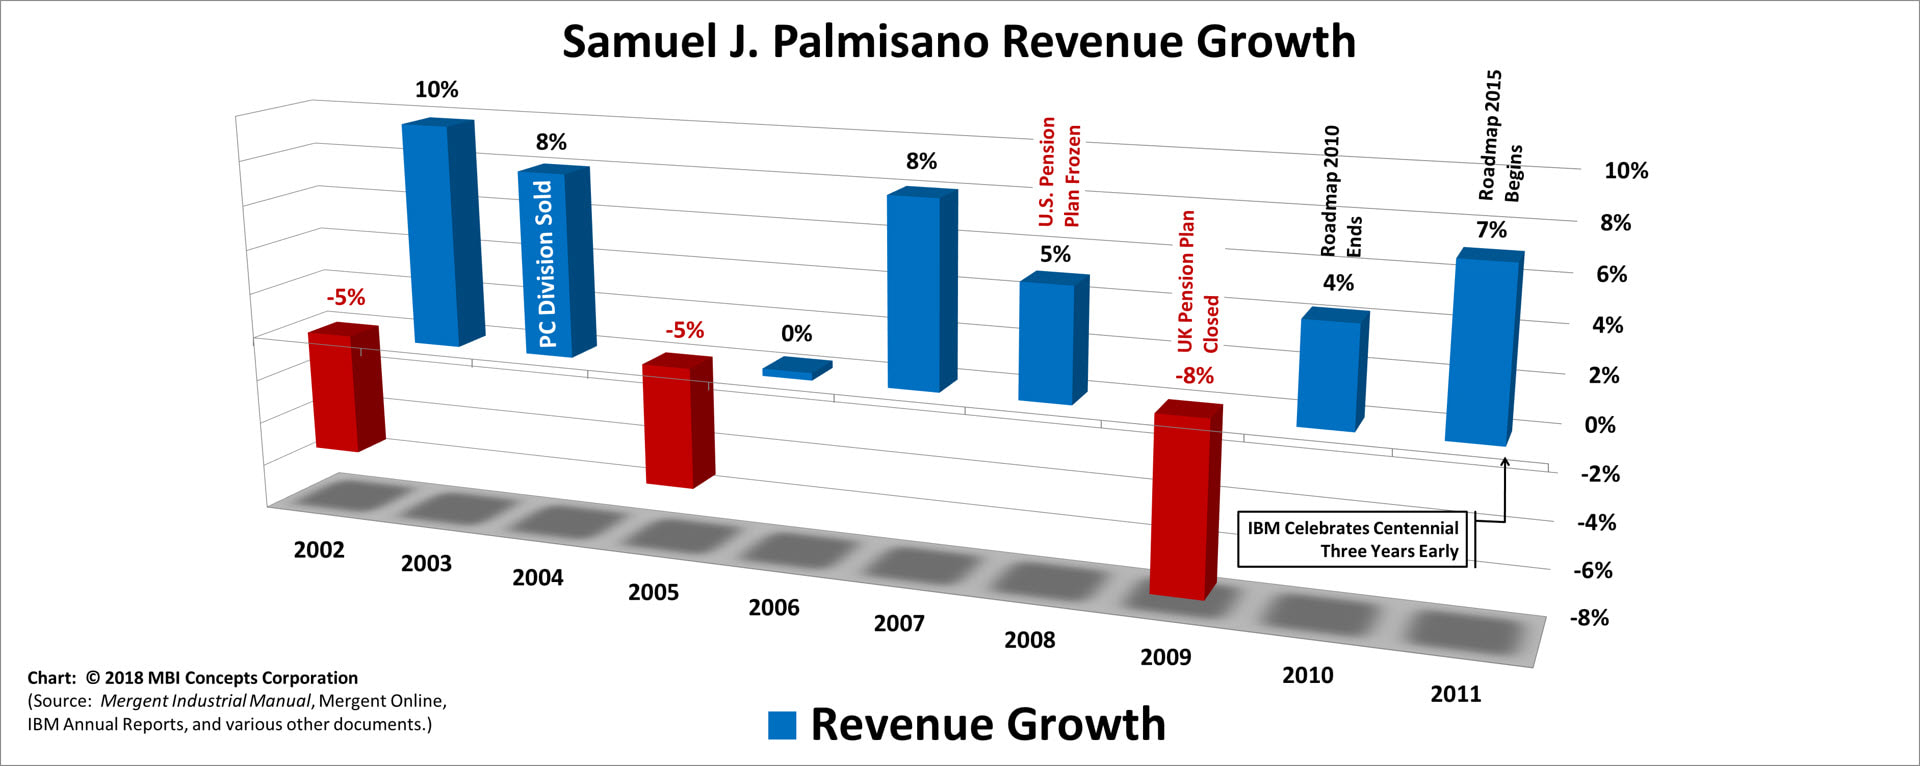 A color bar chart showing IBM's yearly revenue growth from 2002 to 2011 for Samuel J. (Sam) Palmisano.